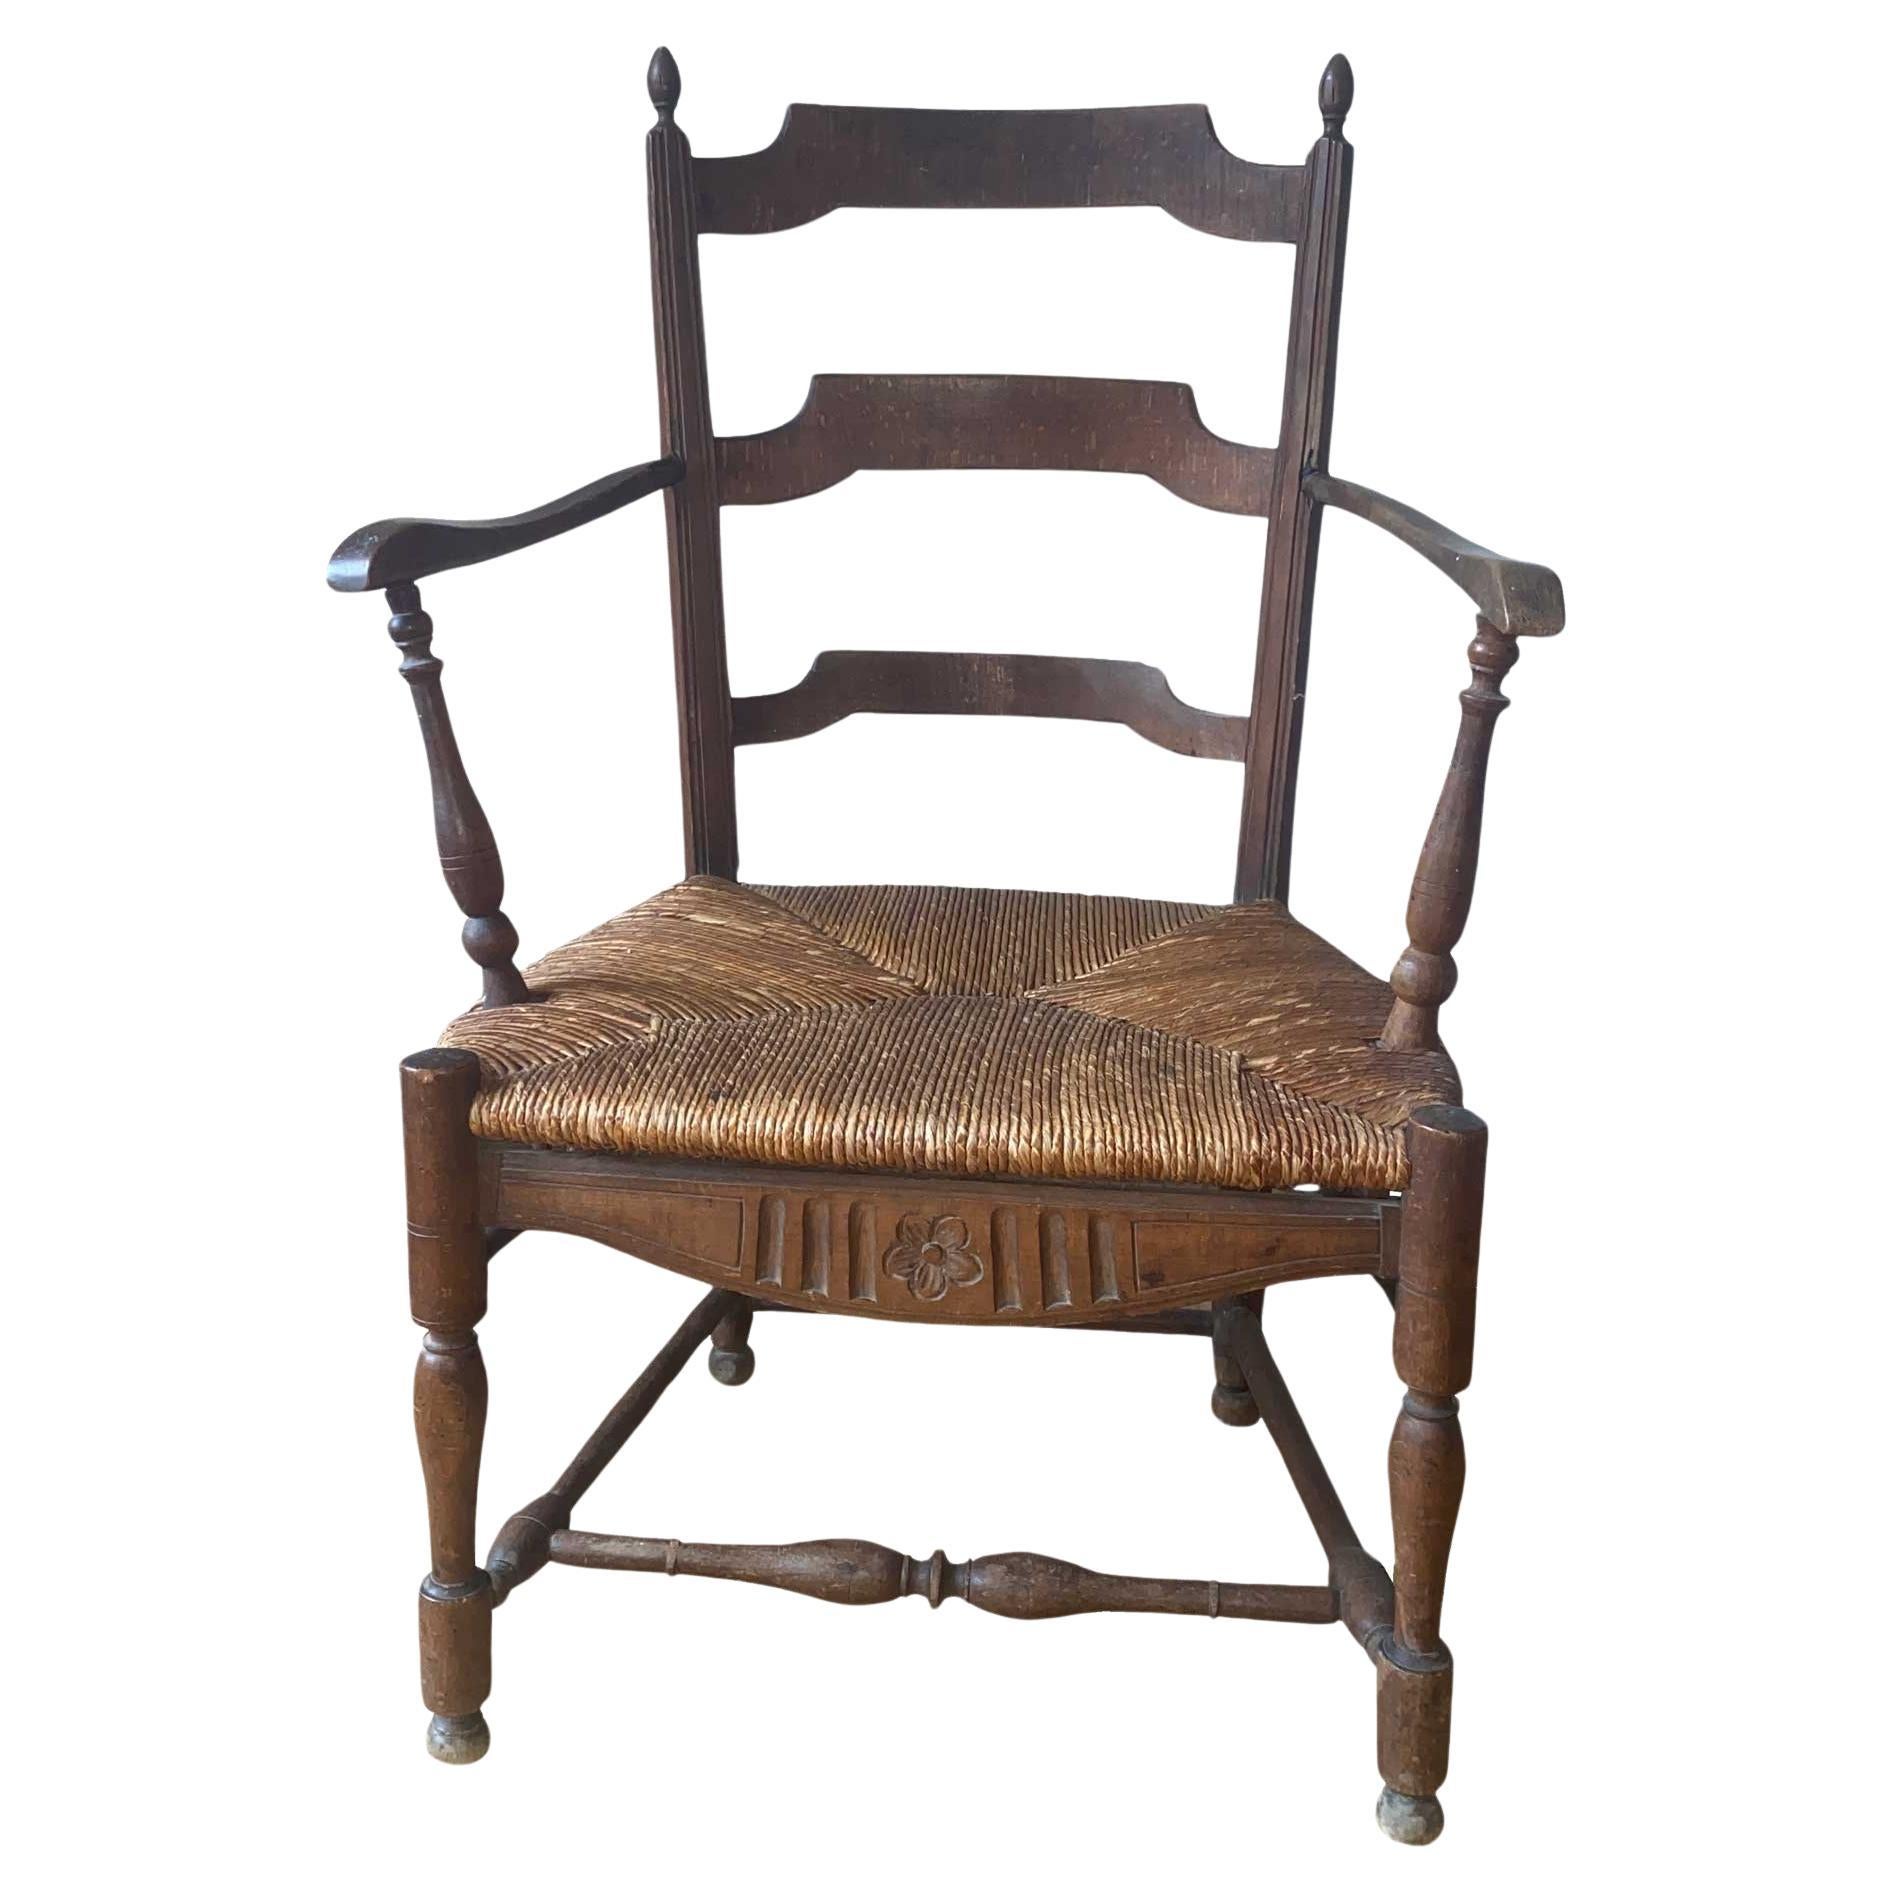 Provencal Straw Armchair From the 18th Century For Sale